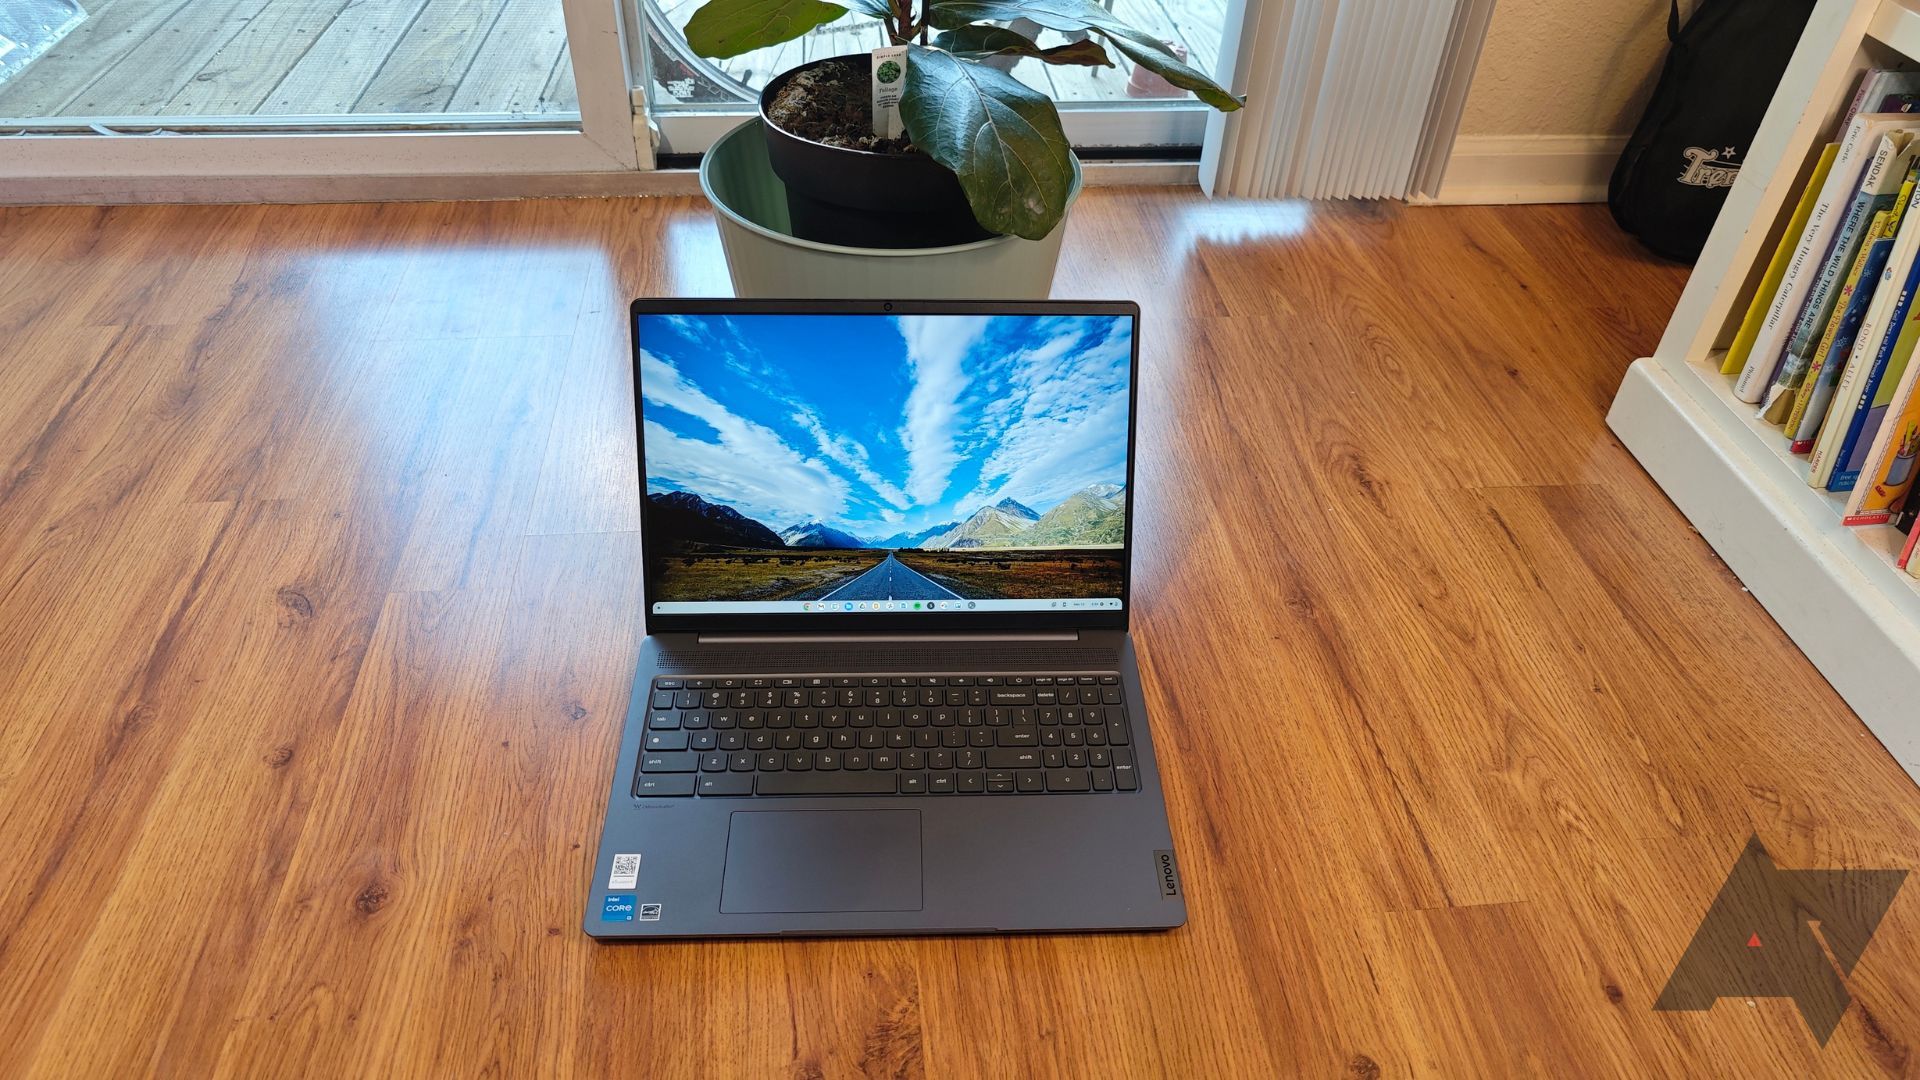 A Lenovo IdeaPad 5i Chromebook sitting on a wood floor in front of a plant